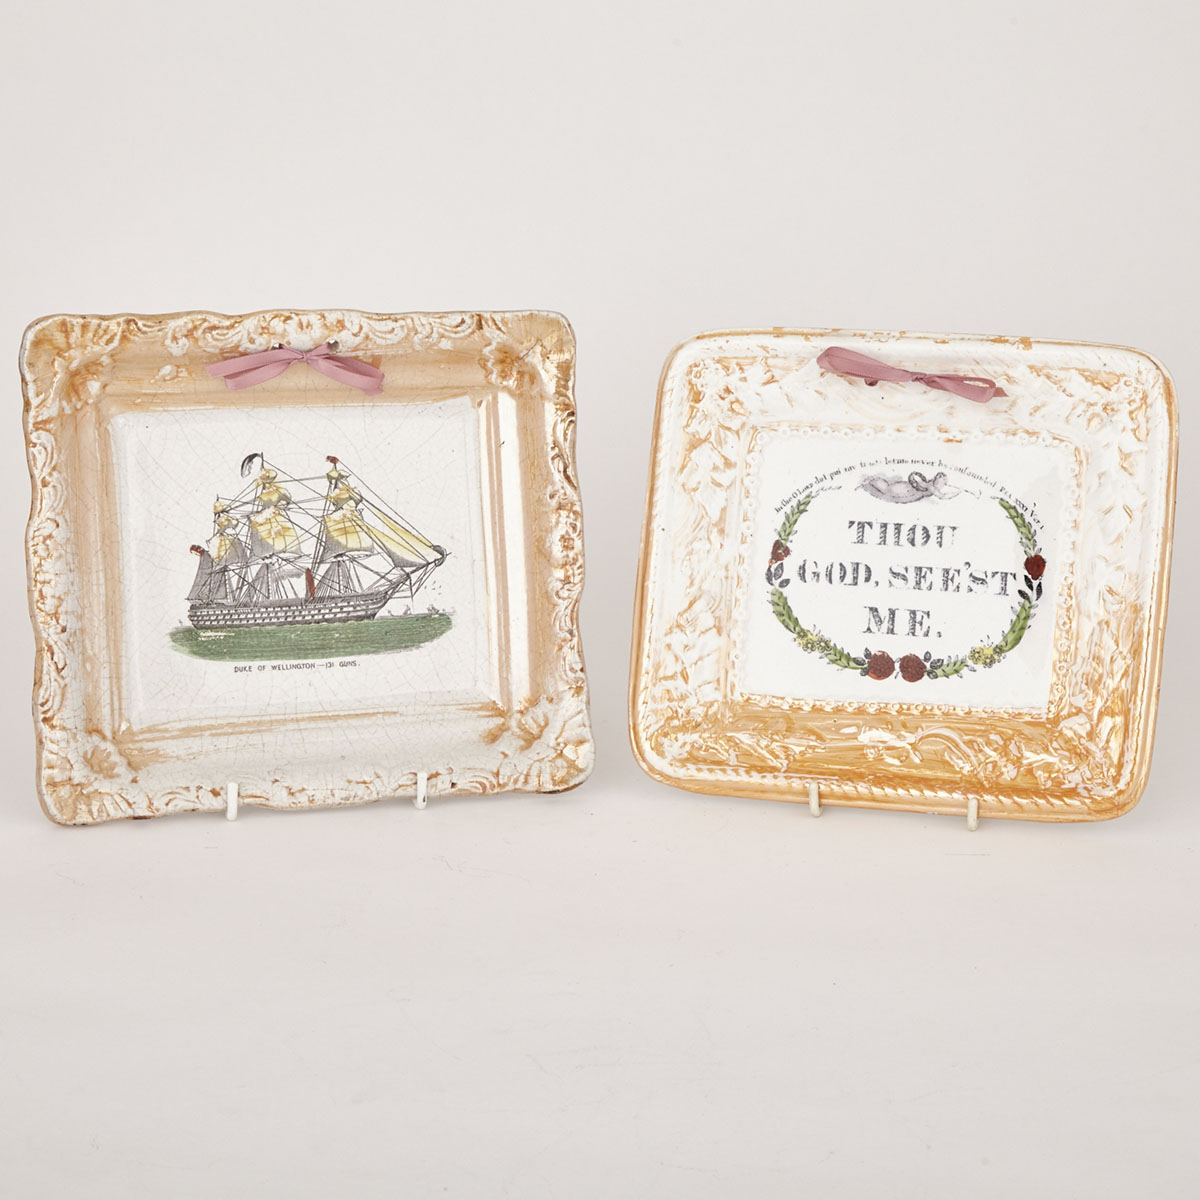 Two Sunderland Luster Wall Plaques: HMS Duke of Wellington and Thou God See’st Me, 19th century